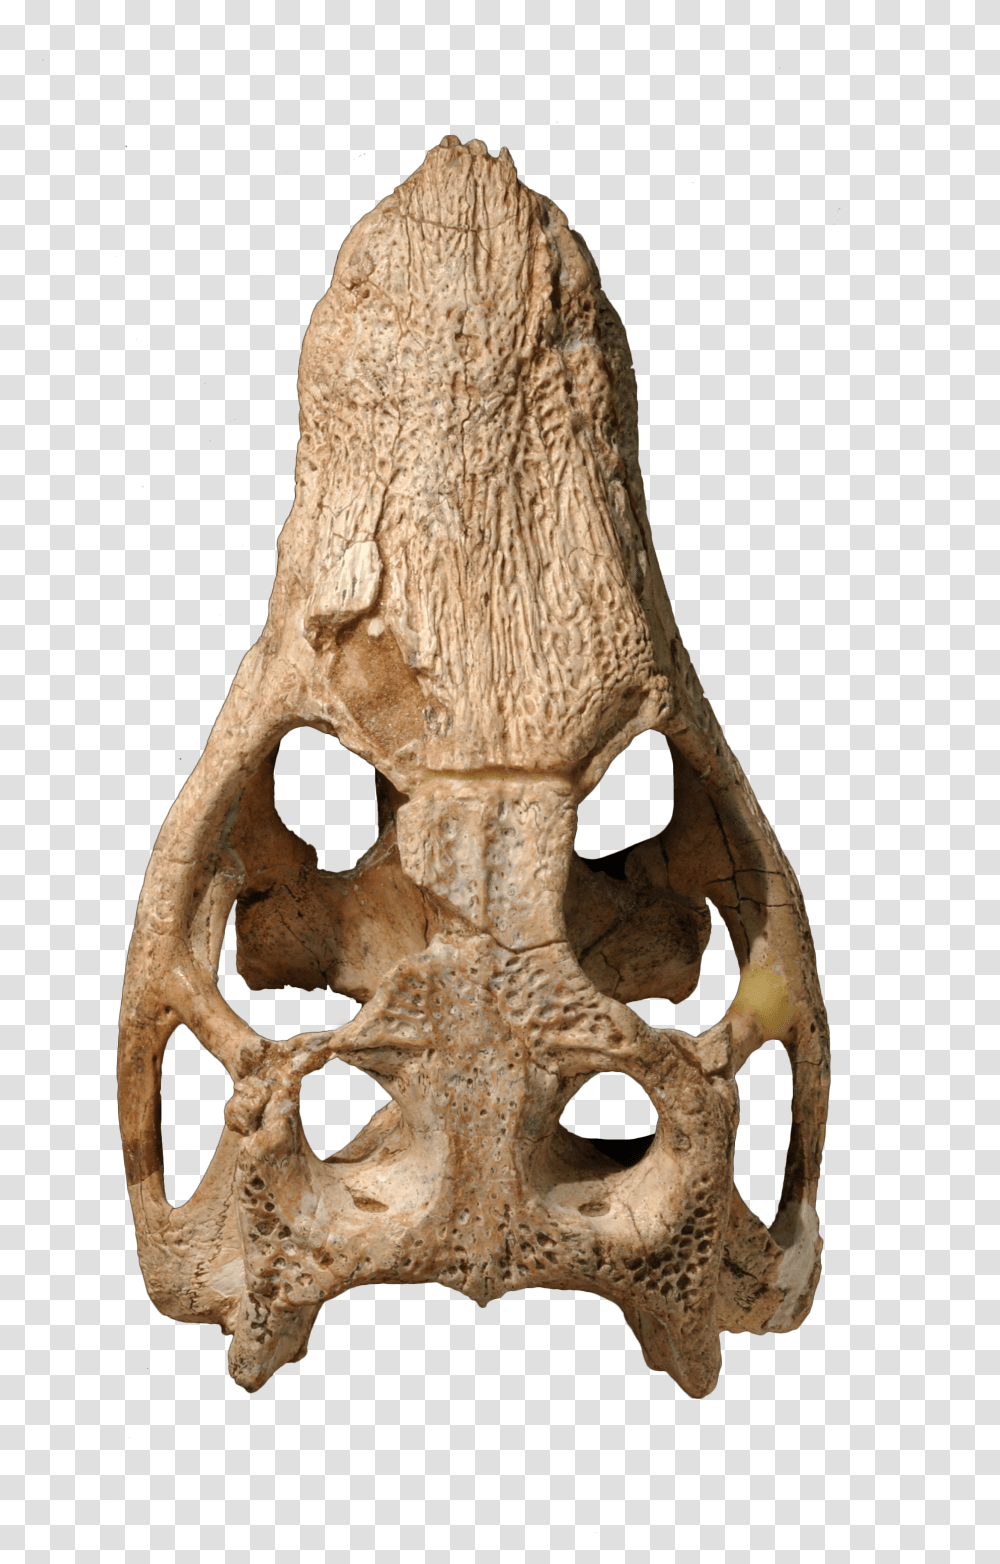 Araripesuchus Skull Image With No Driftwood Transparent Png